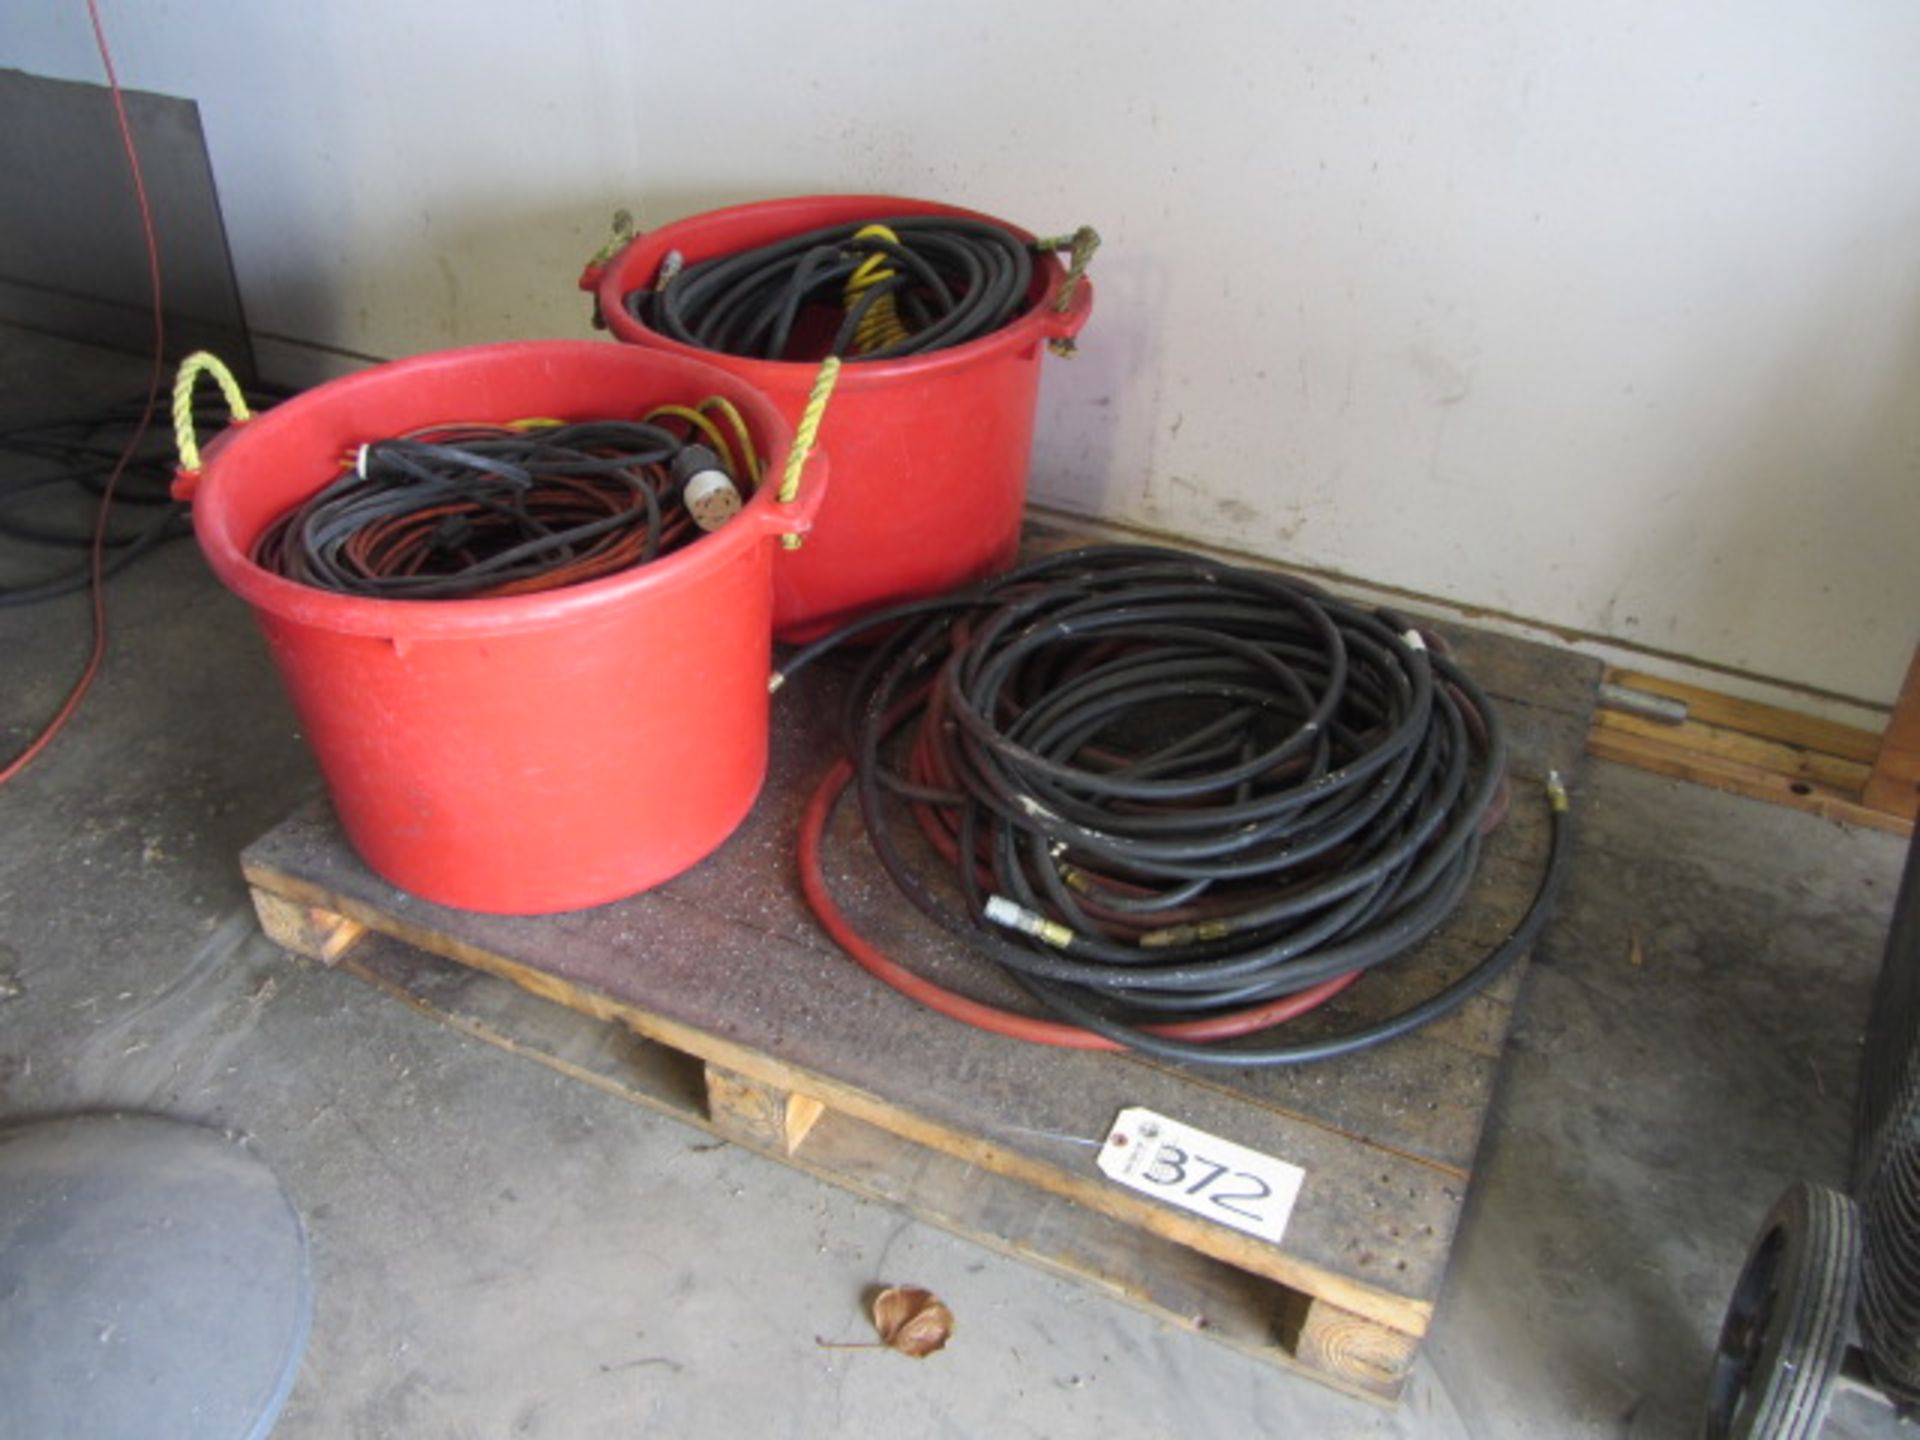 Air Hoses, Electrical Cords